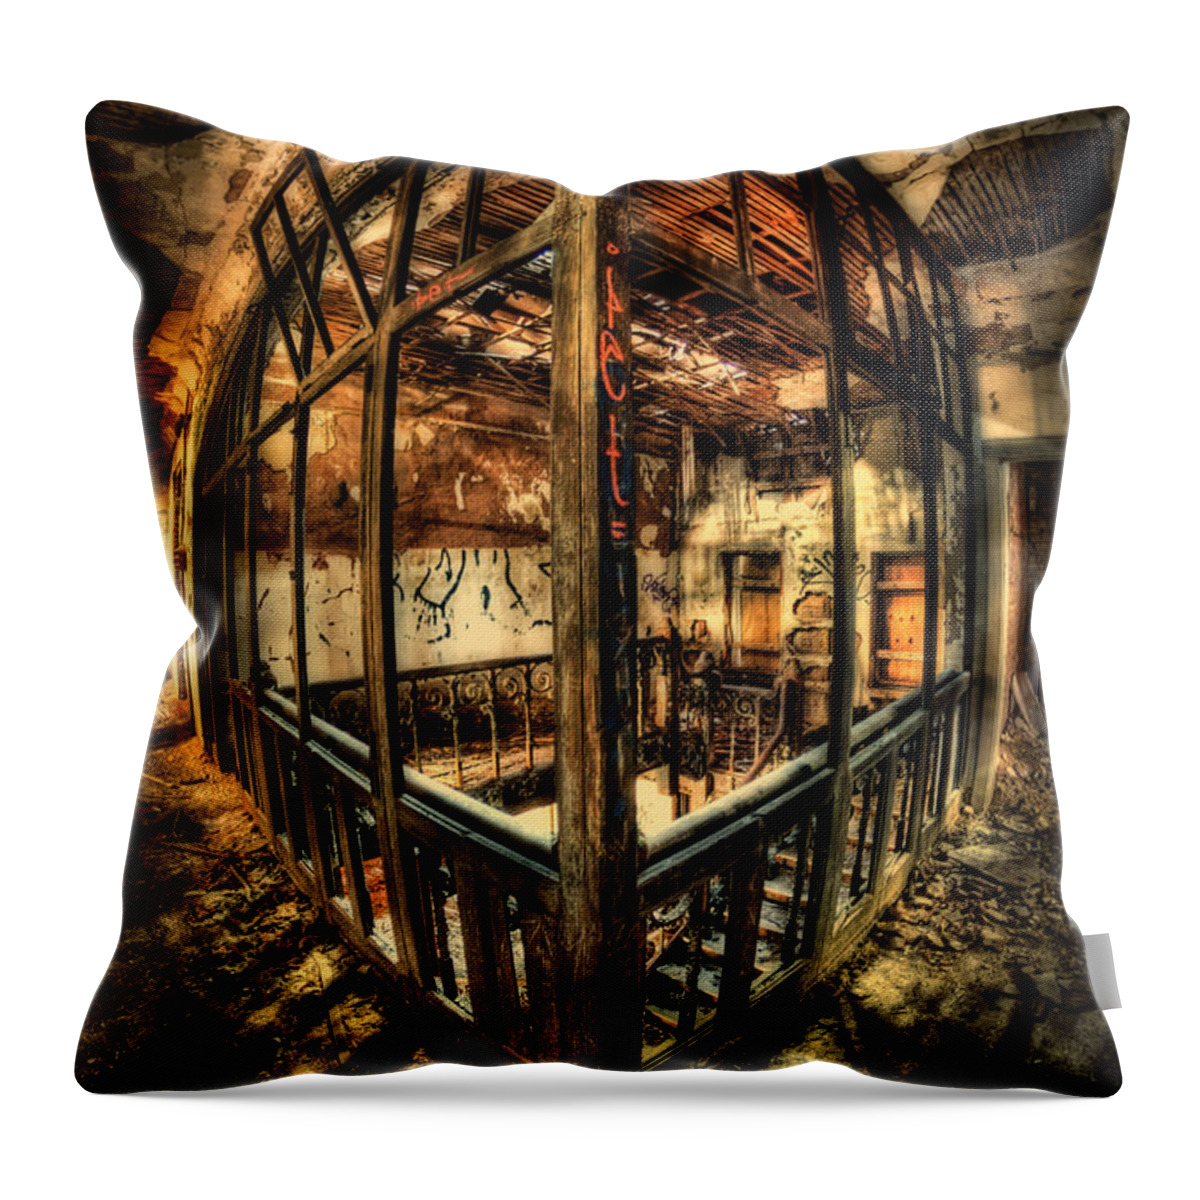 Abandoned Throw Pillow featuring the photograph Madness Comes To Overload by Evelina Kremsdorf